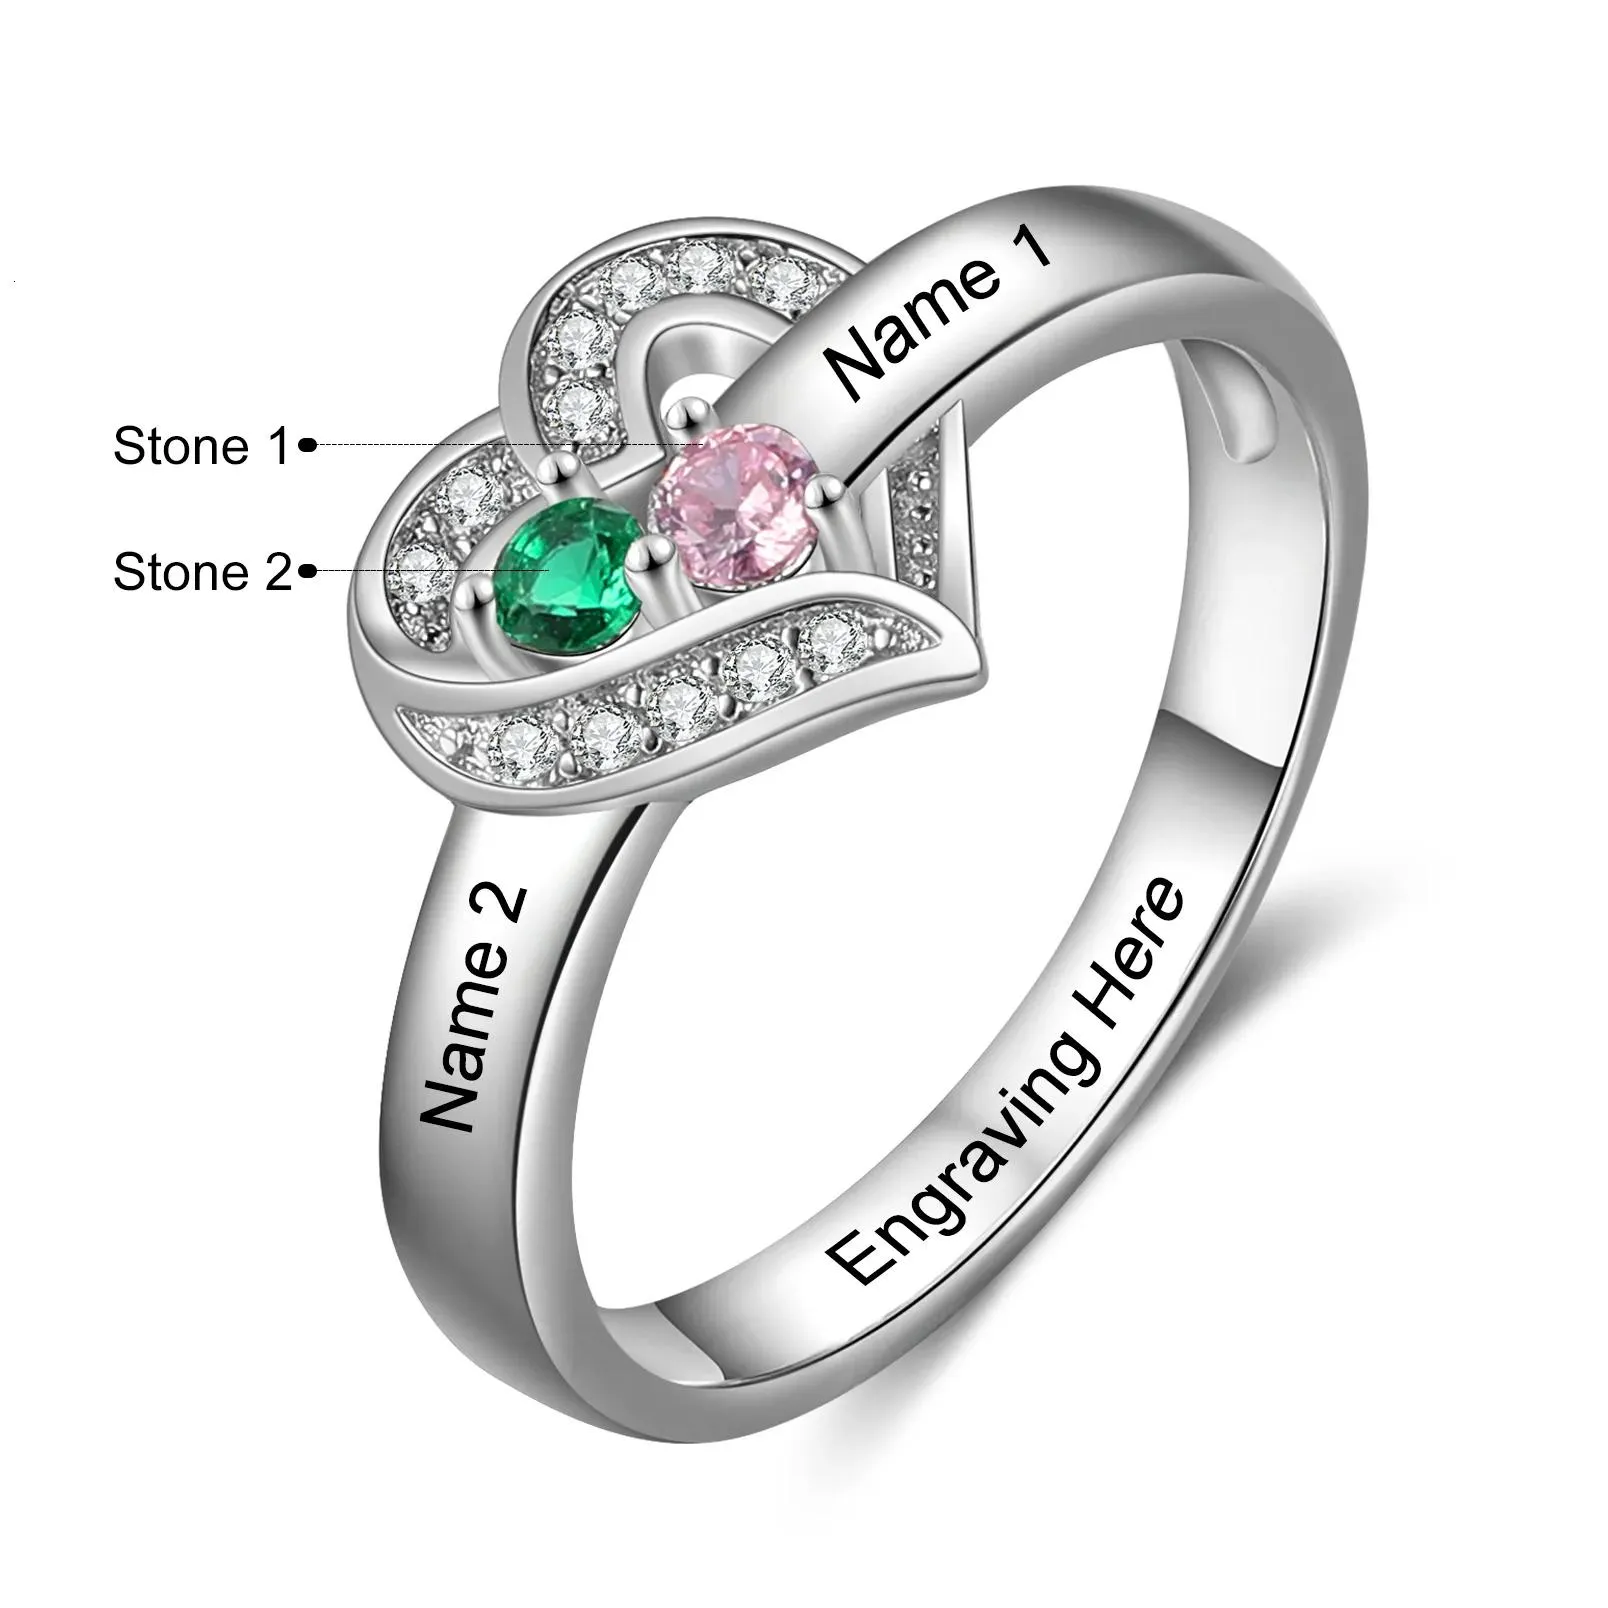 Wedding Rings 925 Sterling Sier Personalized 1-8 Name Carved Ring With Birthday Stone Set Heart Suitable For Womens Mothers Day Gift Dhfrt